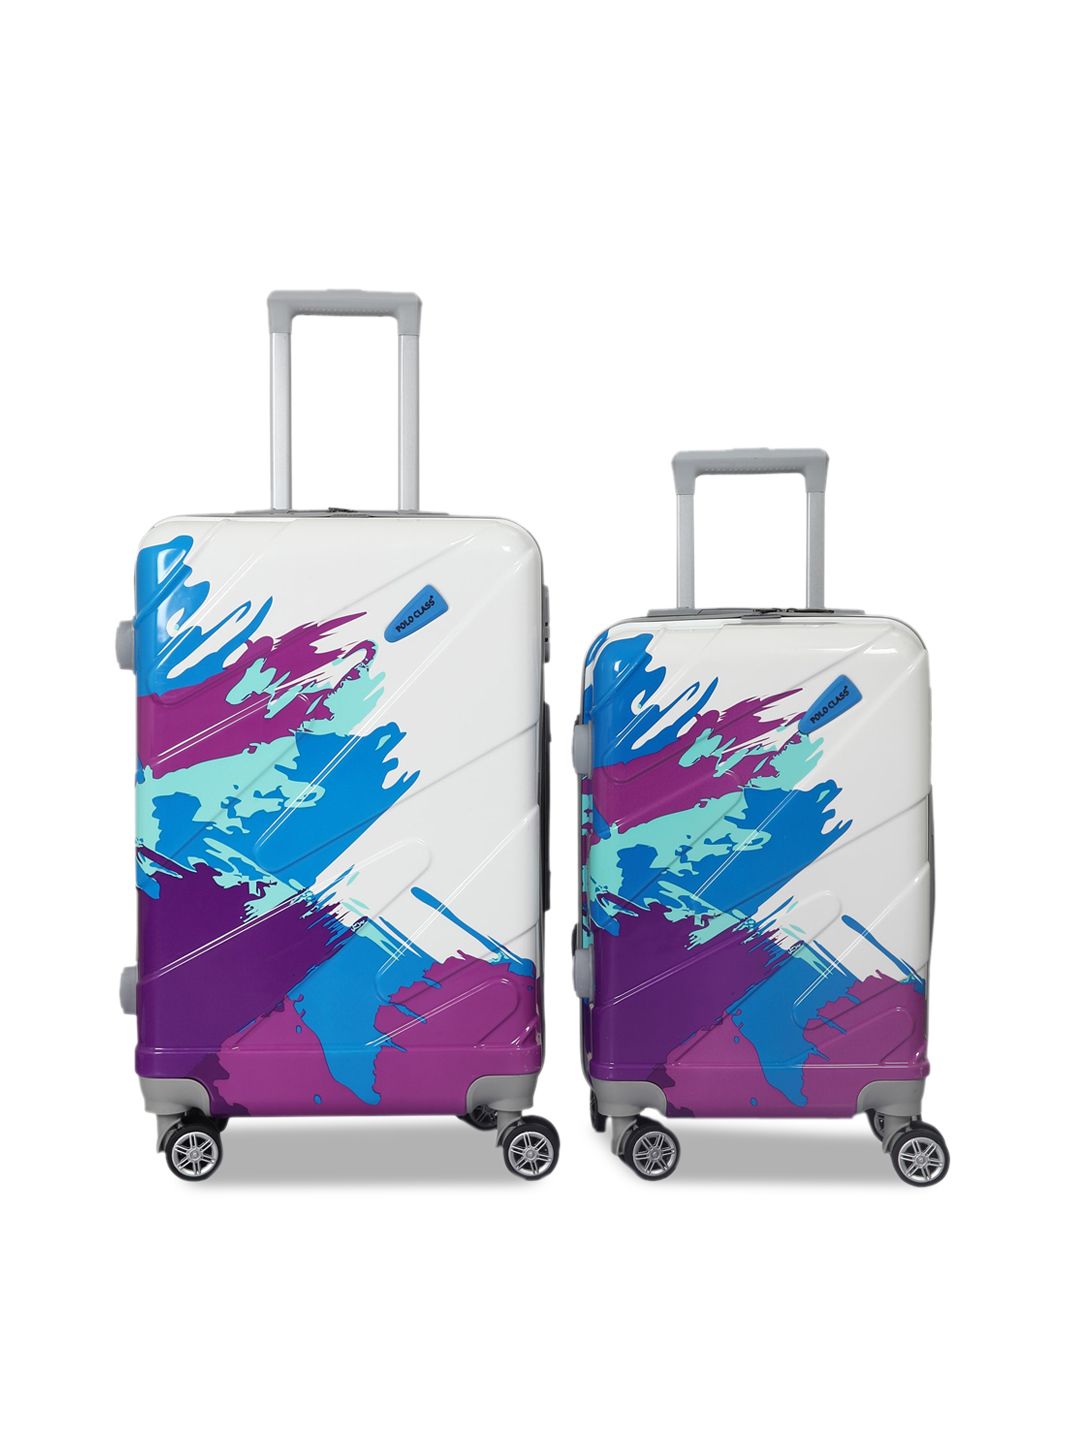 Polo Class Set Of 2 Blue Printed Hard Case 360 Degree Rotation Trolley Suitcases Price in India